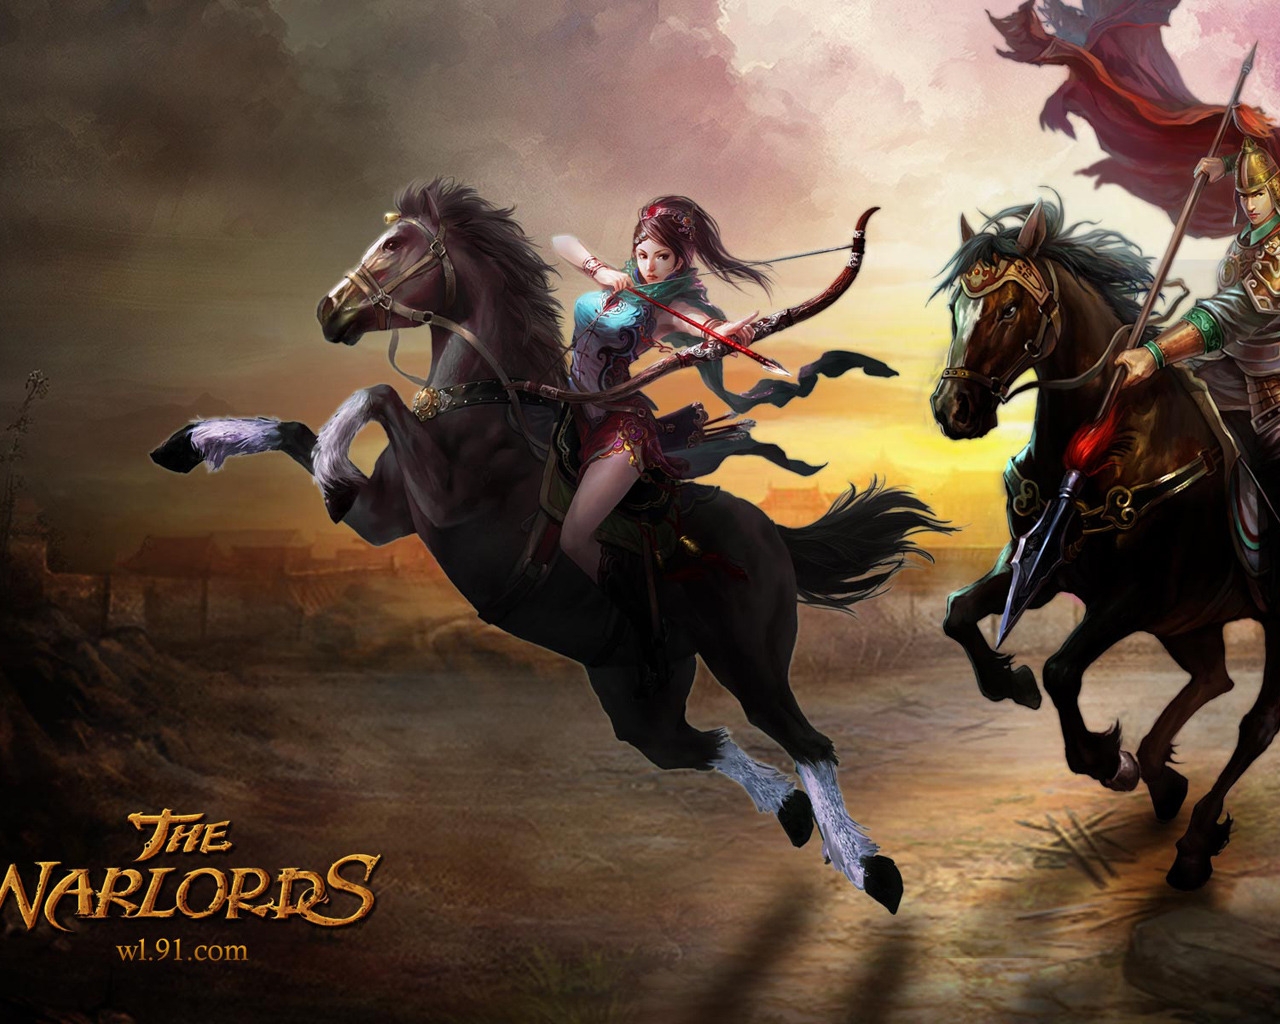 The Warlords for 1280 x 1024 resolution